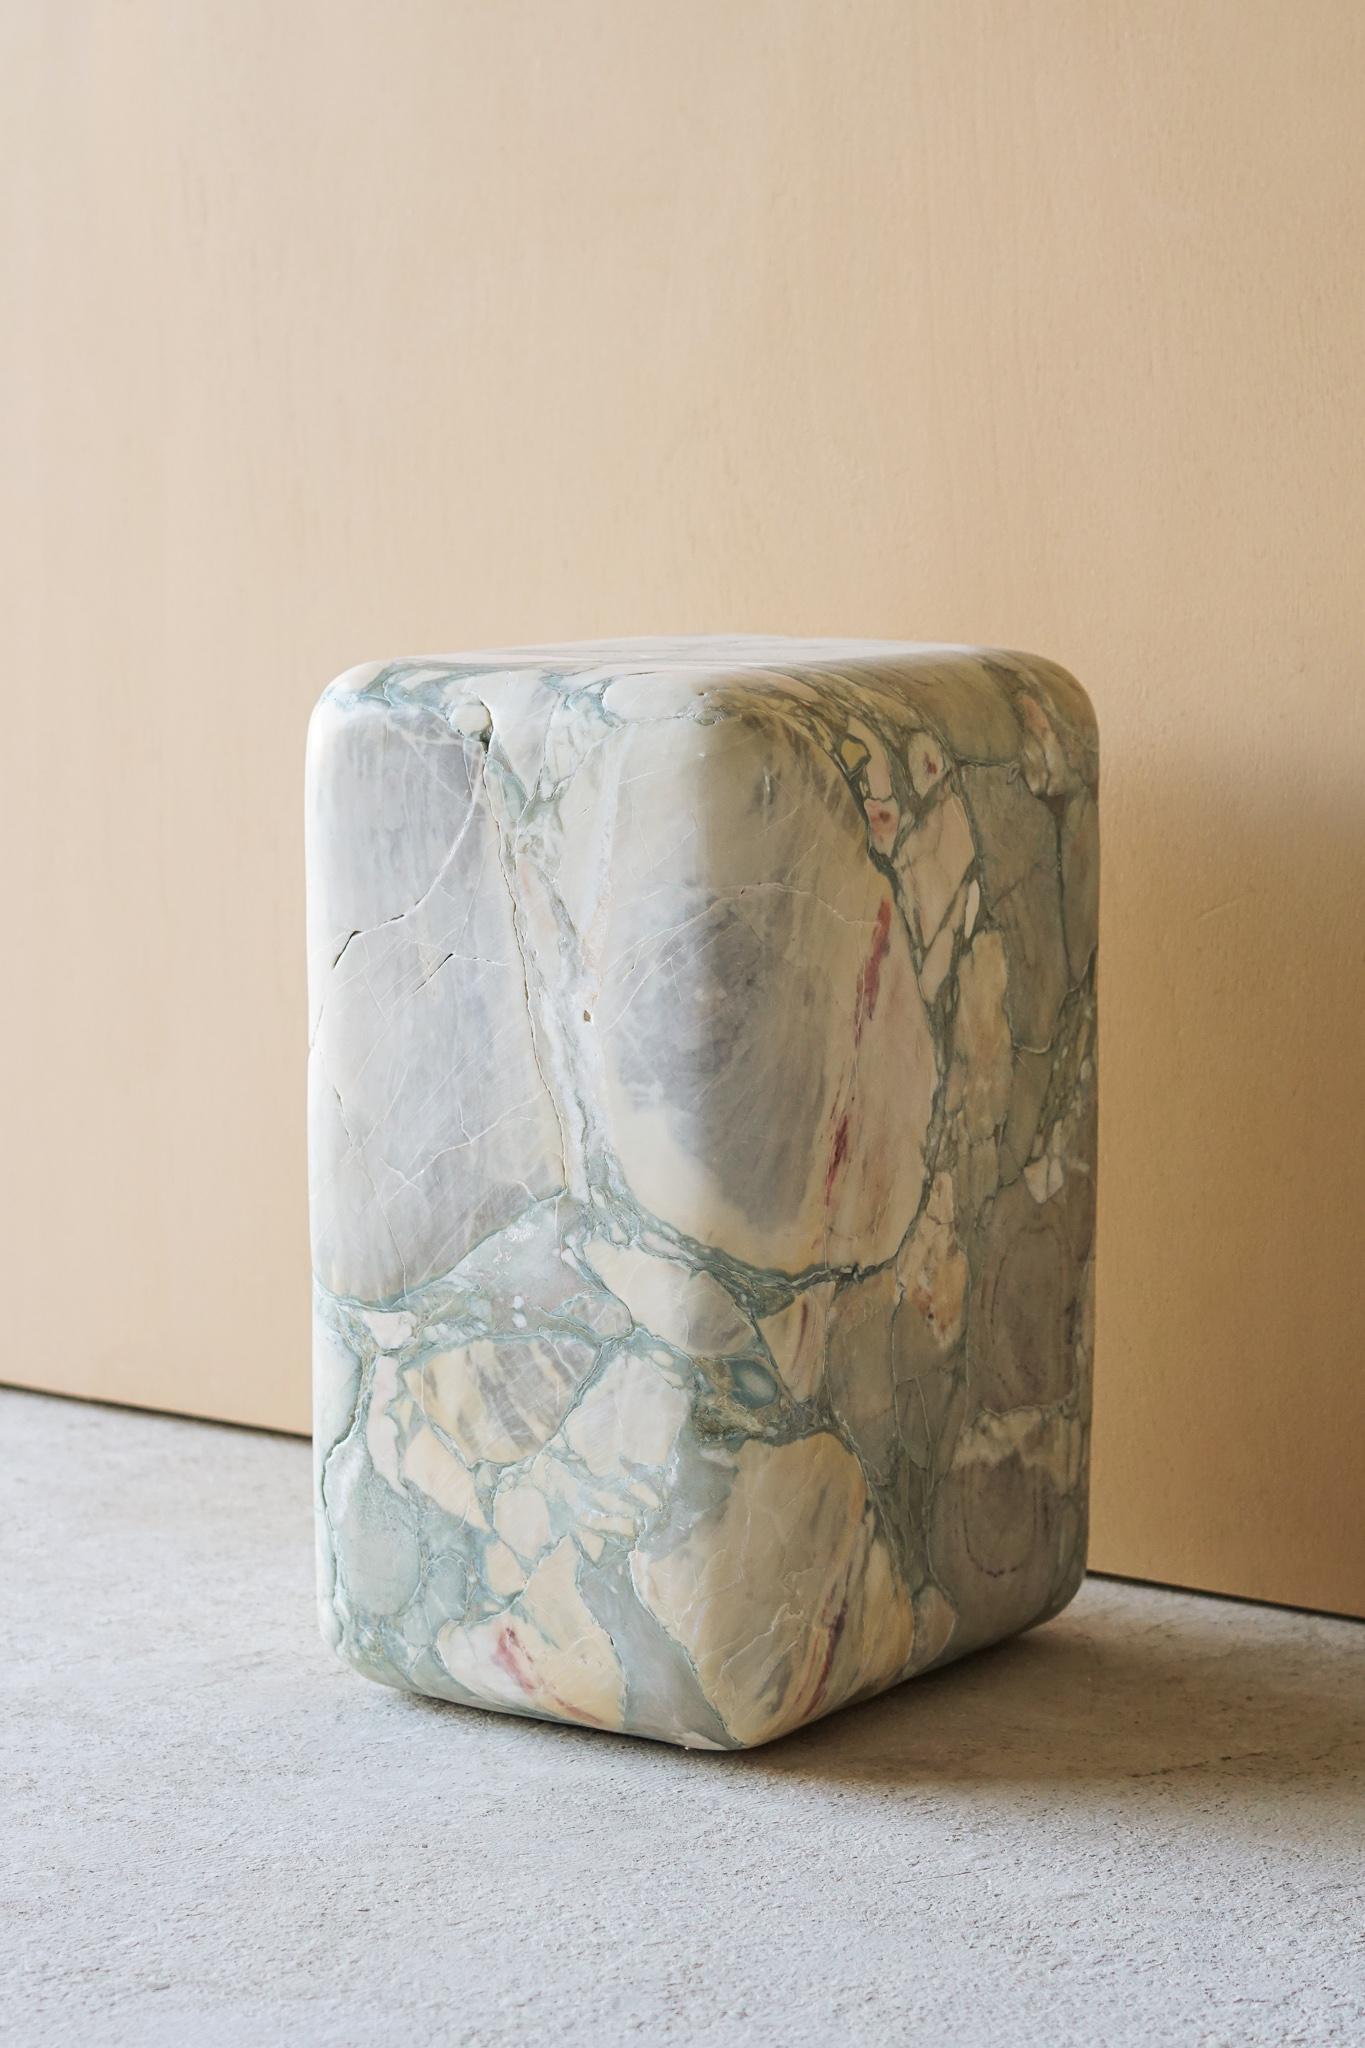 Chunk side table by Swell Studio
Dimensions: D31 x W26 x H46 cm 
Material: White alabaster, Breccia Stazzema.


Hand shaped from a solid block of stone. The unique coloration and veining in the blocks are the focal point of this simple yet